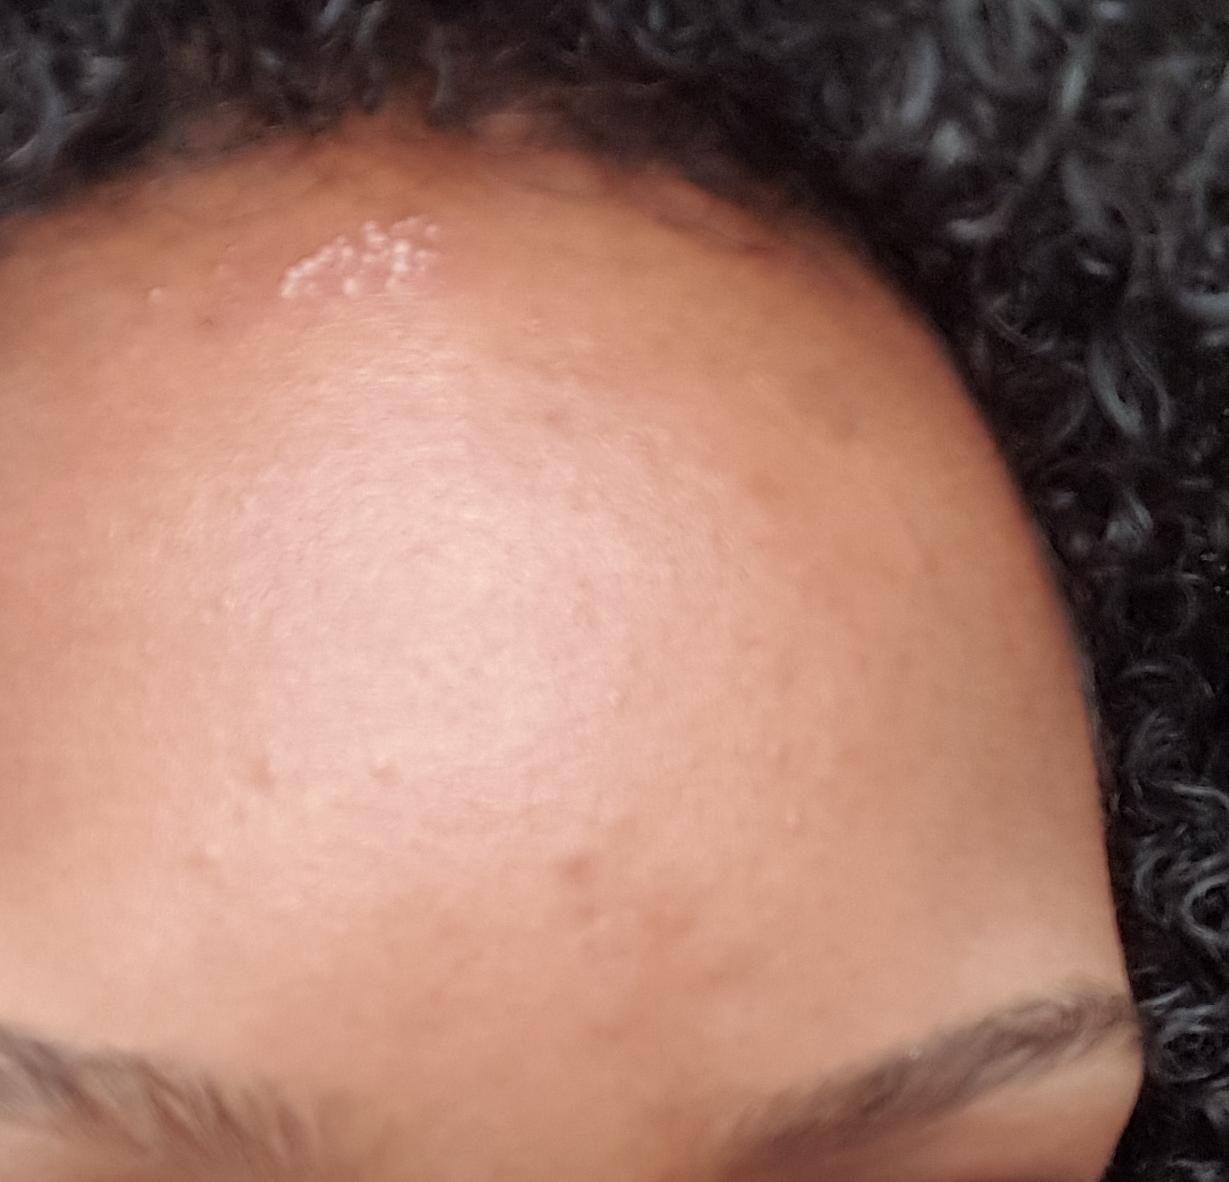 [Skin concerns] Little white bumps appeared over night. What should I ...